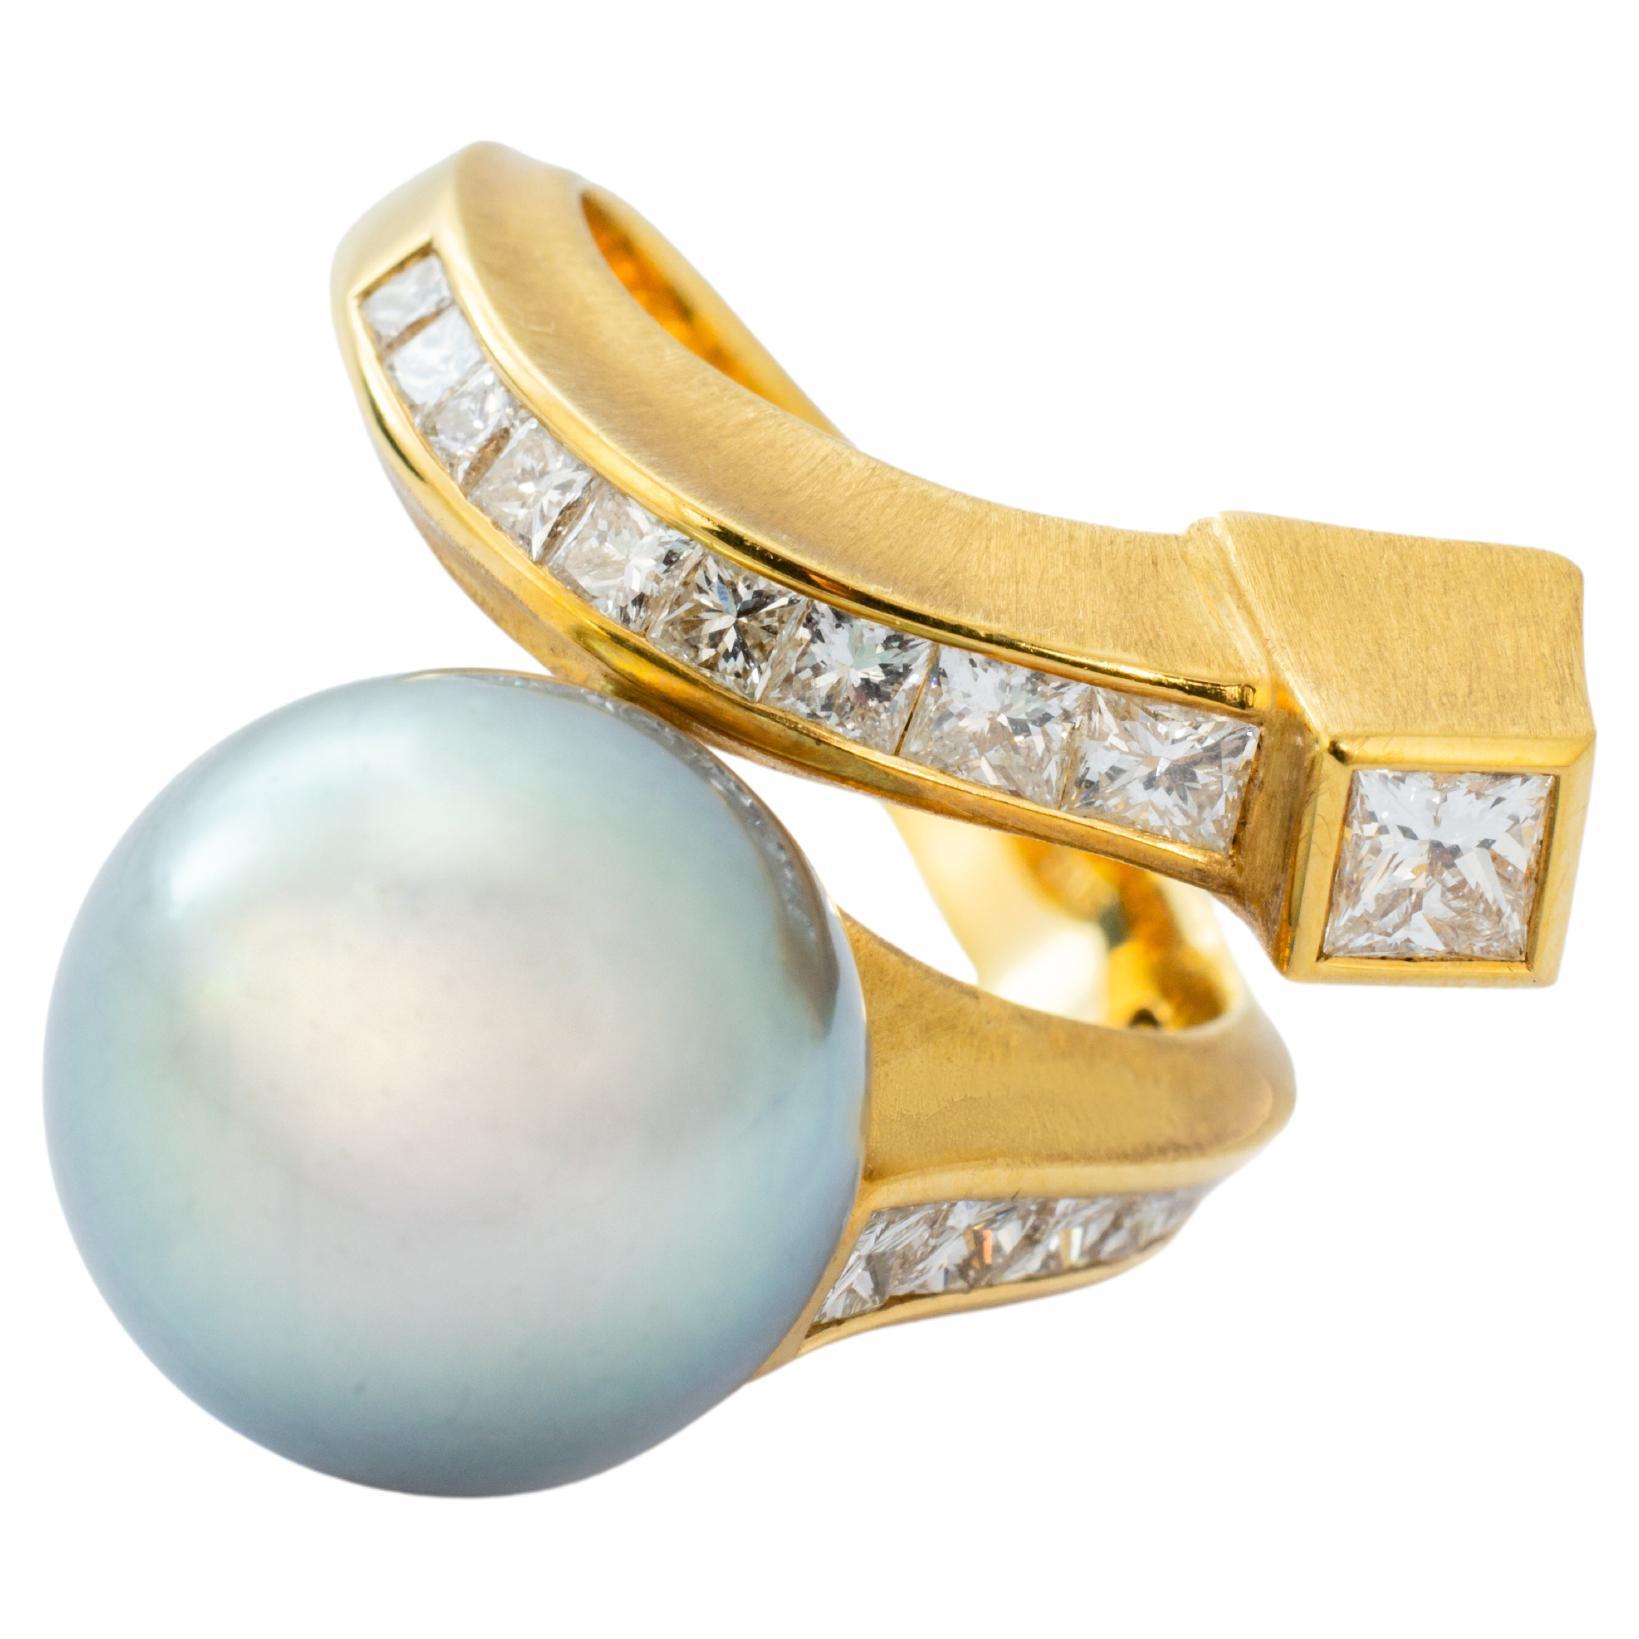 "Costis" Eiffel Ring, 13.60mm Gray South Sea Pearl, and 1.45 cts Diamonds